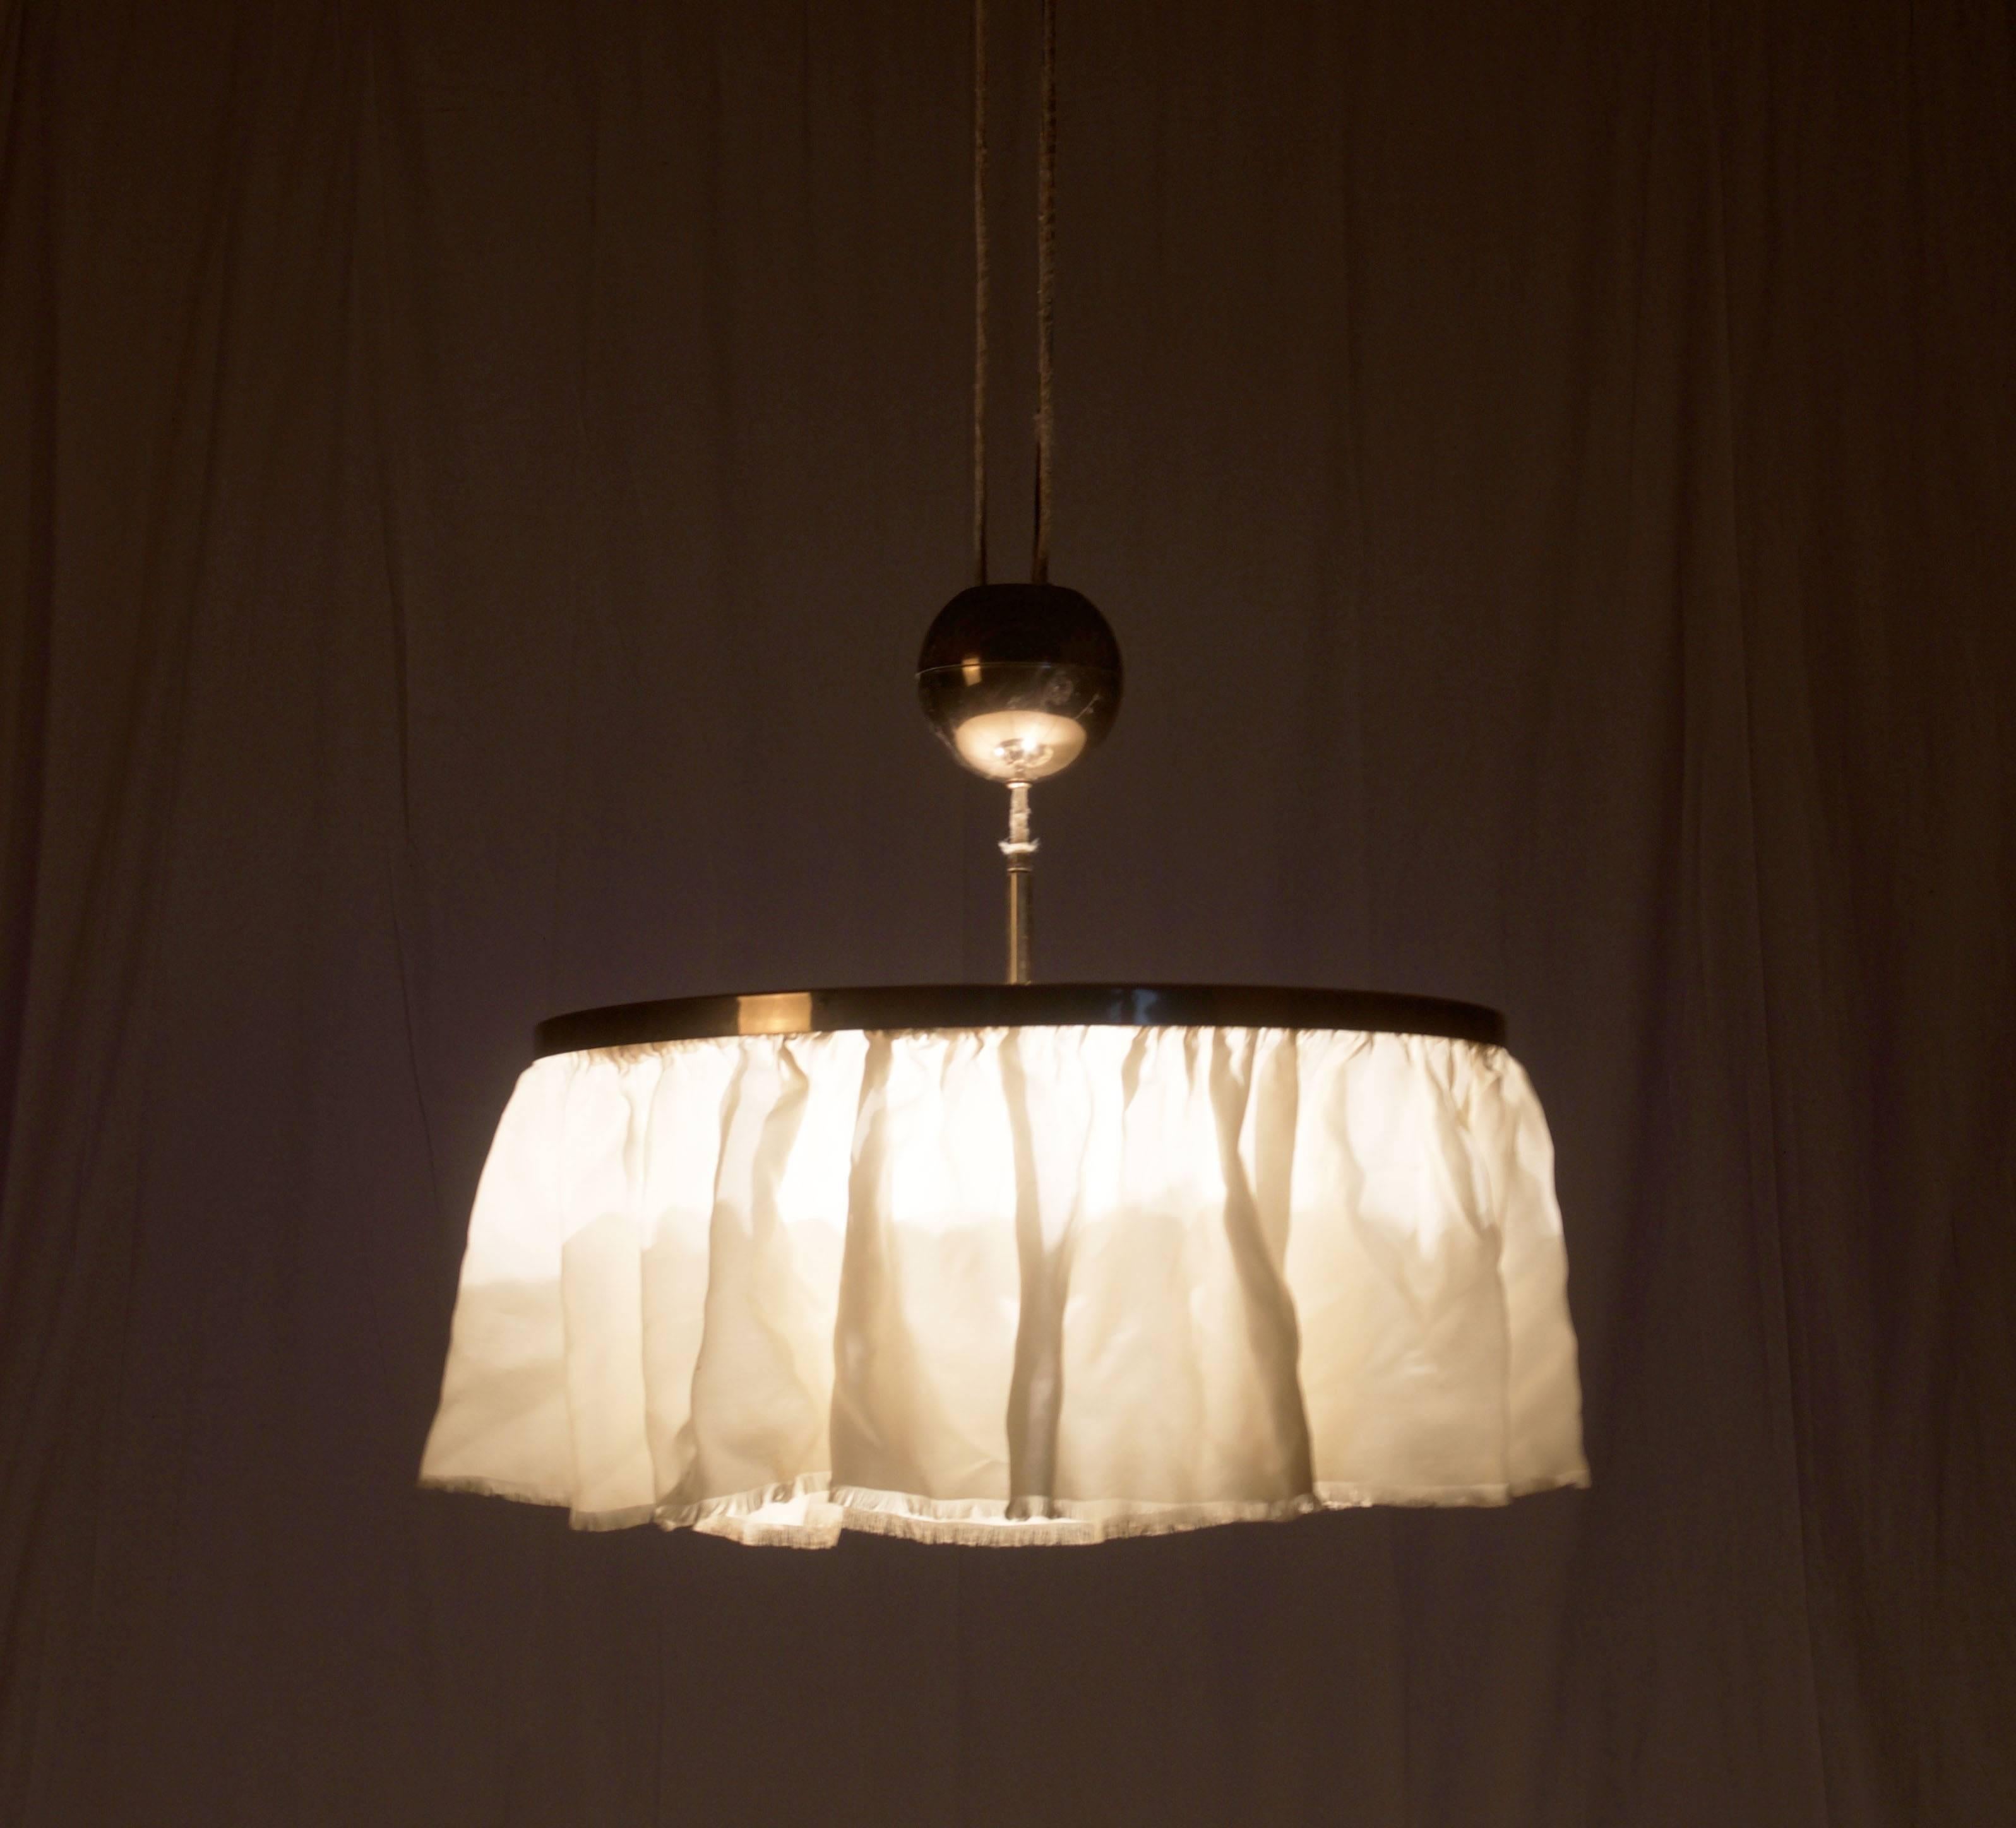 Brass with silk lampshade, originally designed by Adolf Loos and produced in the 1960s by J.T. Kalmar.